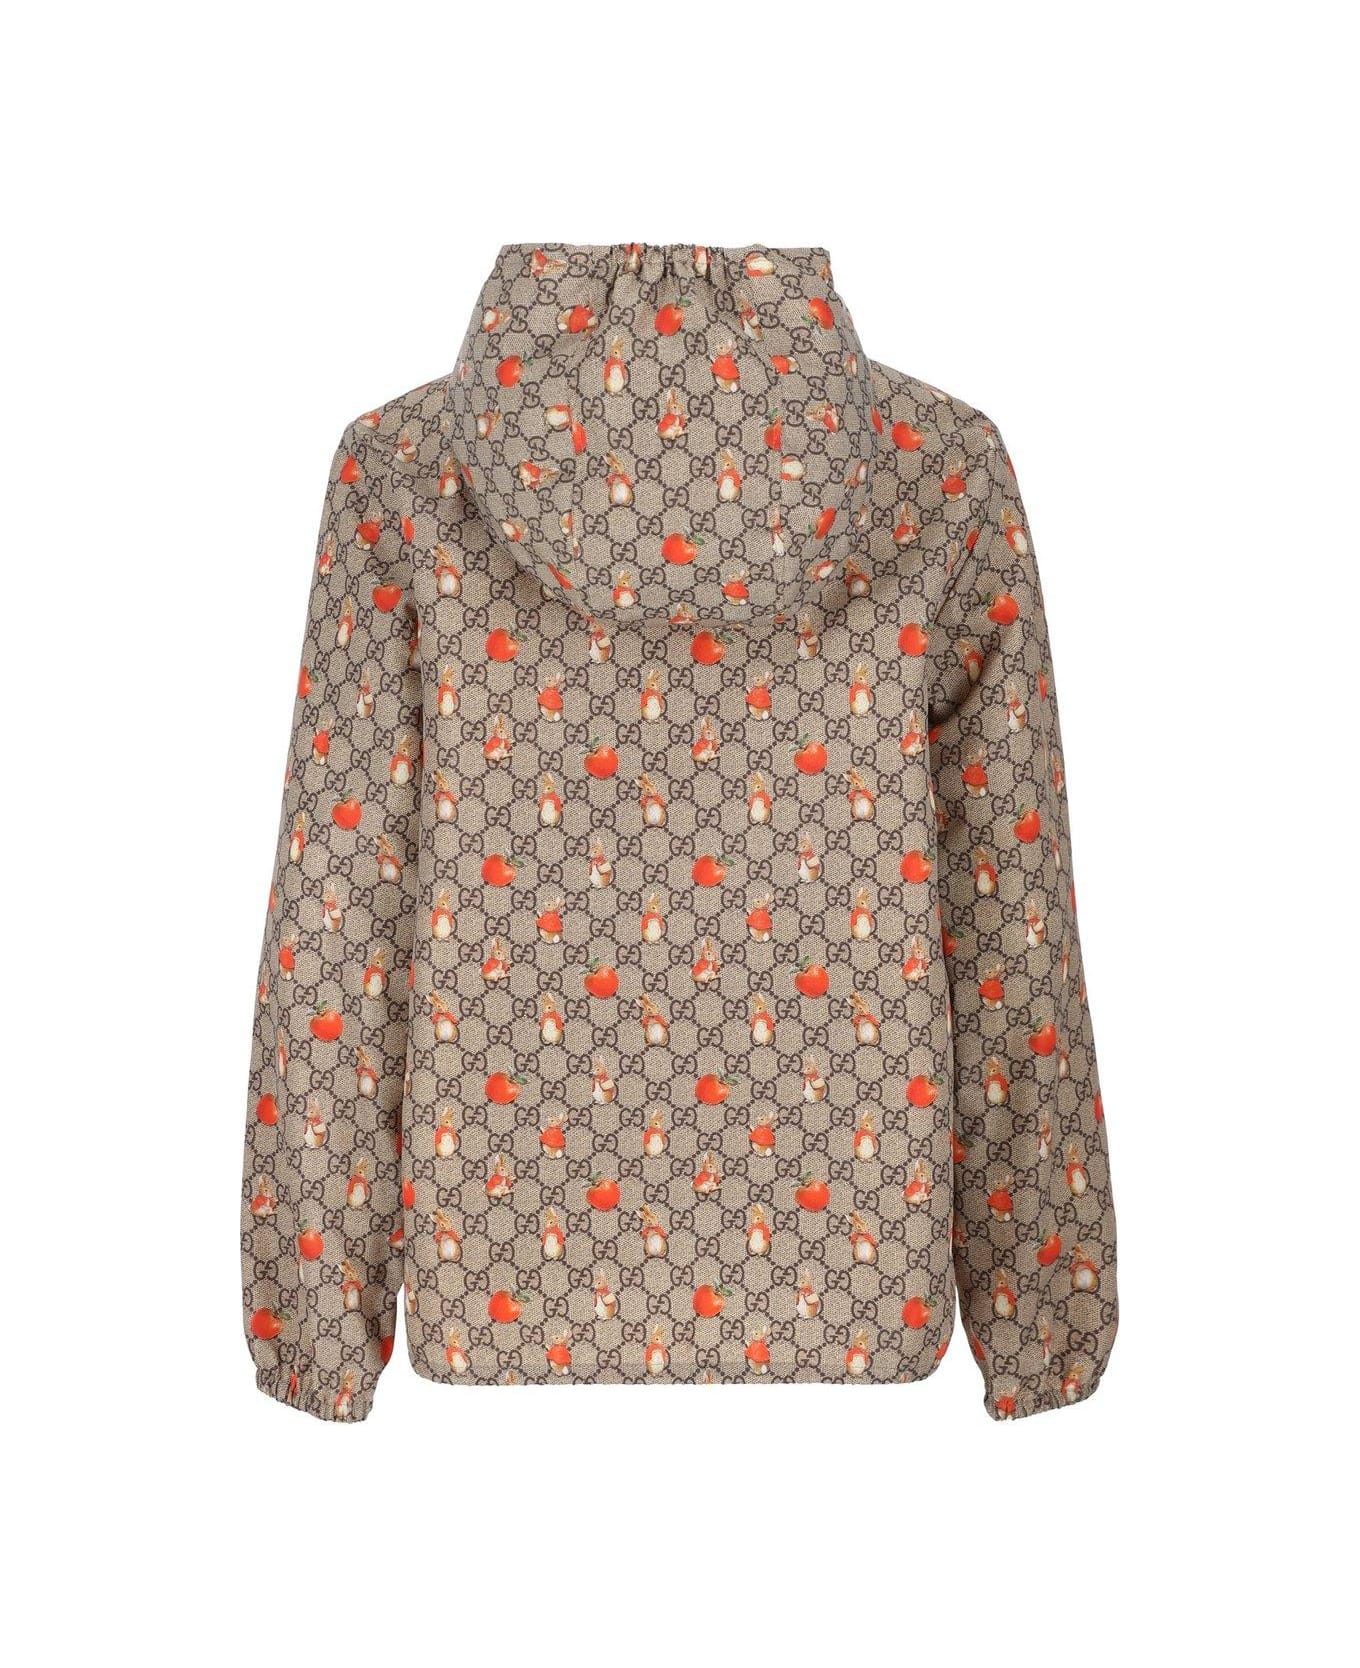 Gucci Allover Printed Hooded Jacket - Beige